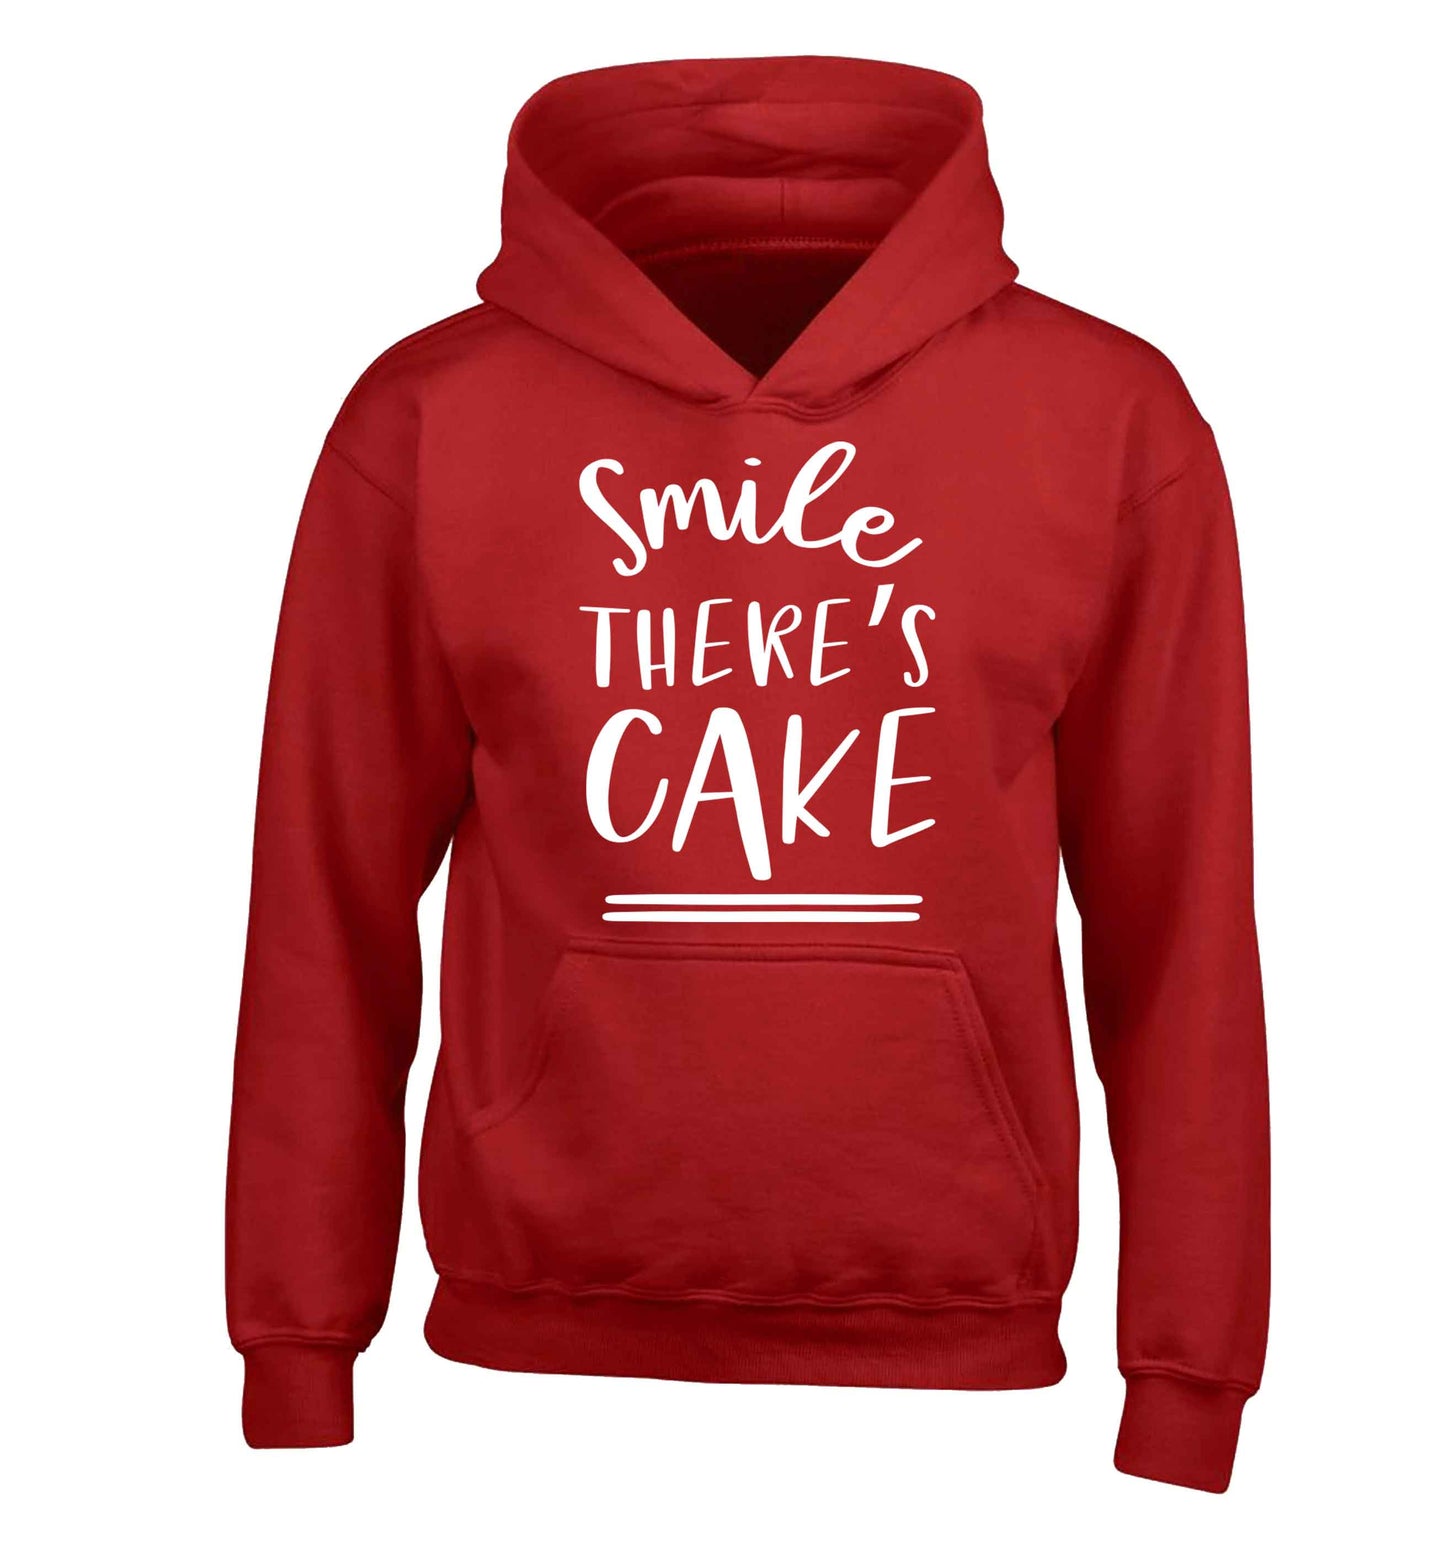 Smile there's cake children's red hoodie 12-13 Years